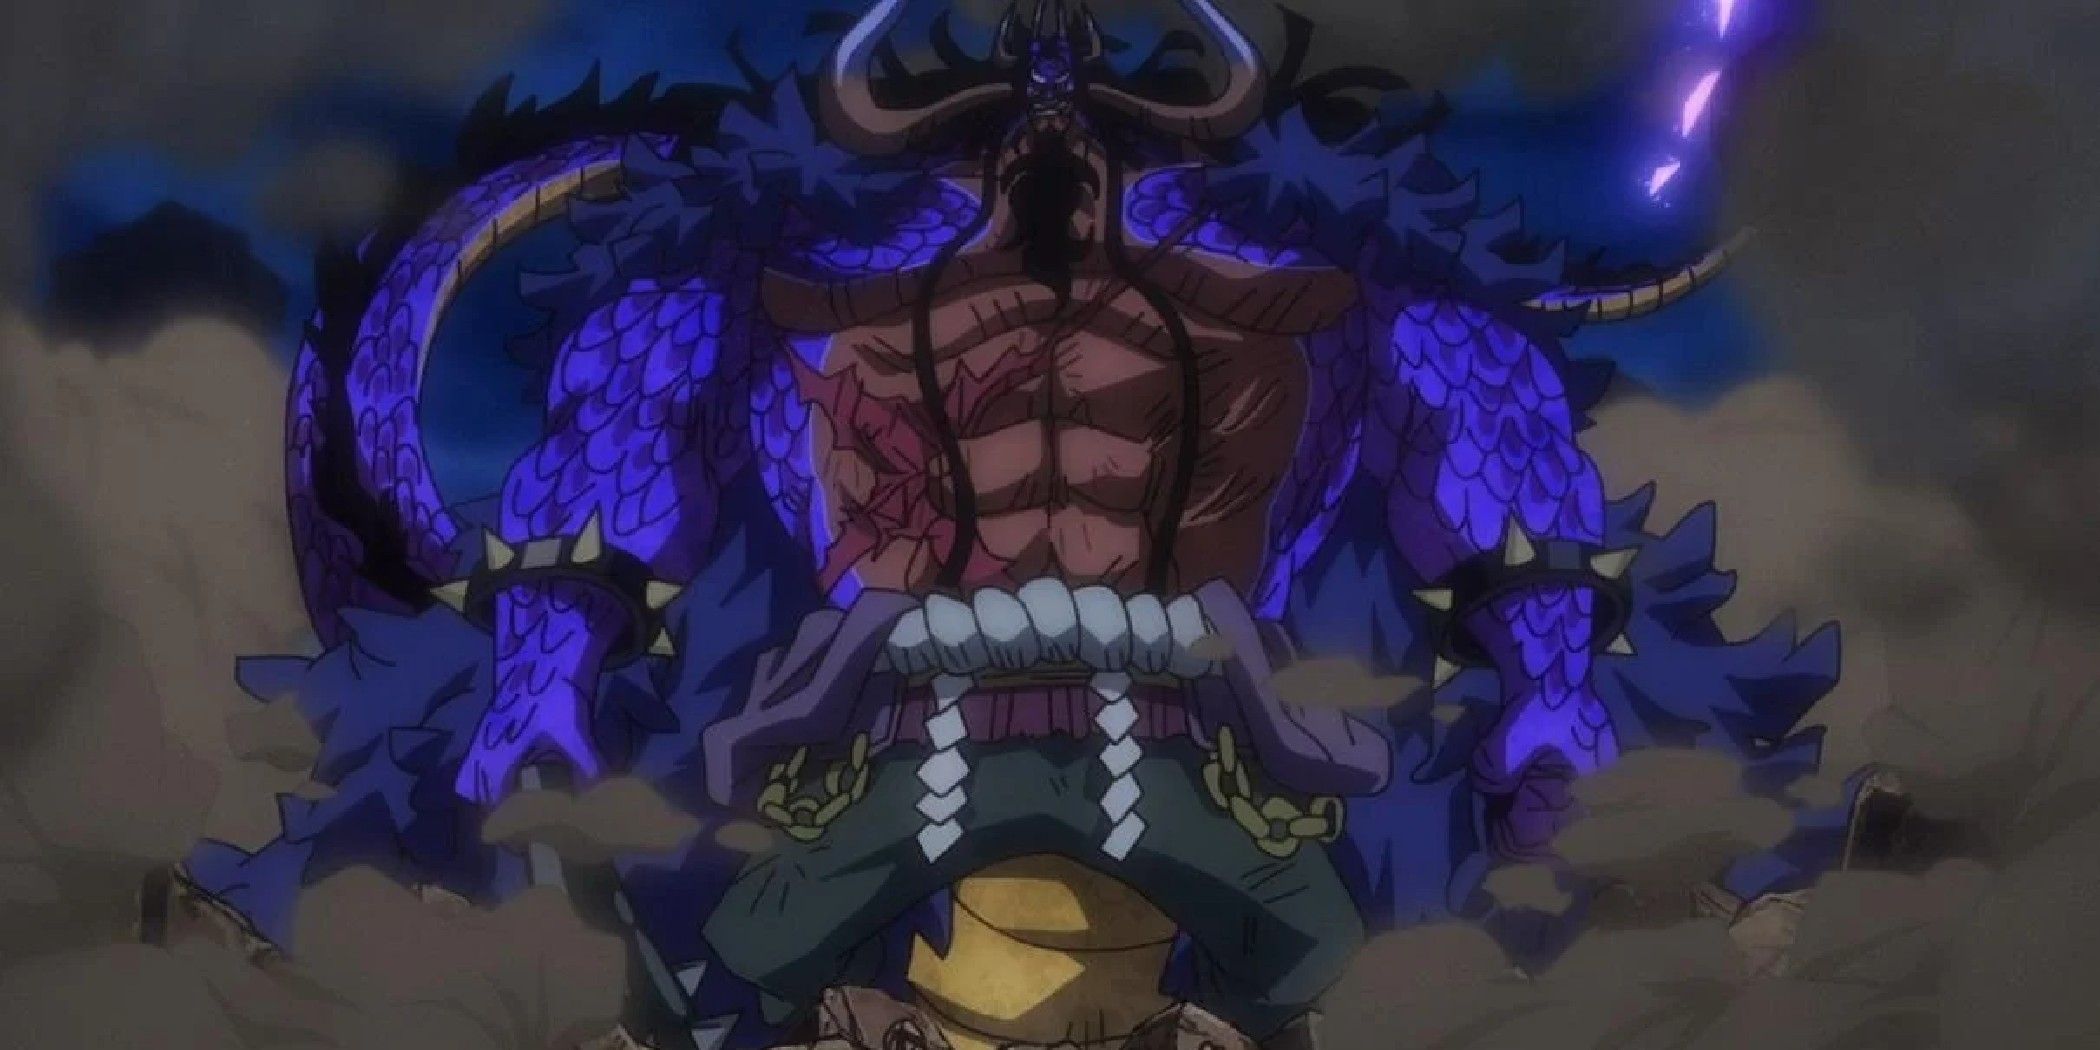 Kaido's Hybrid form from the anime.